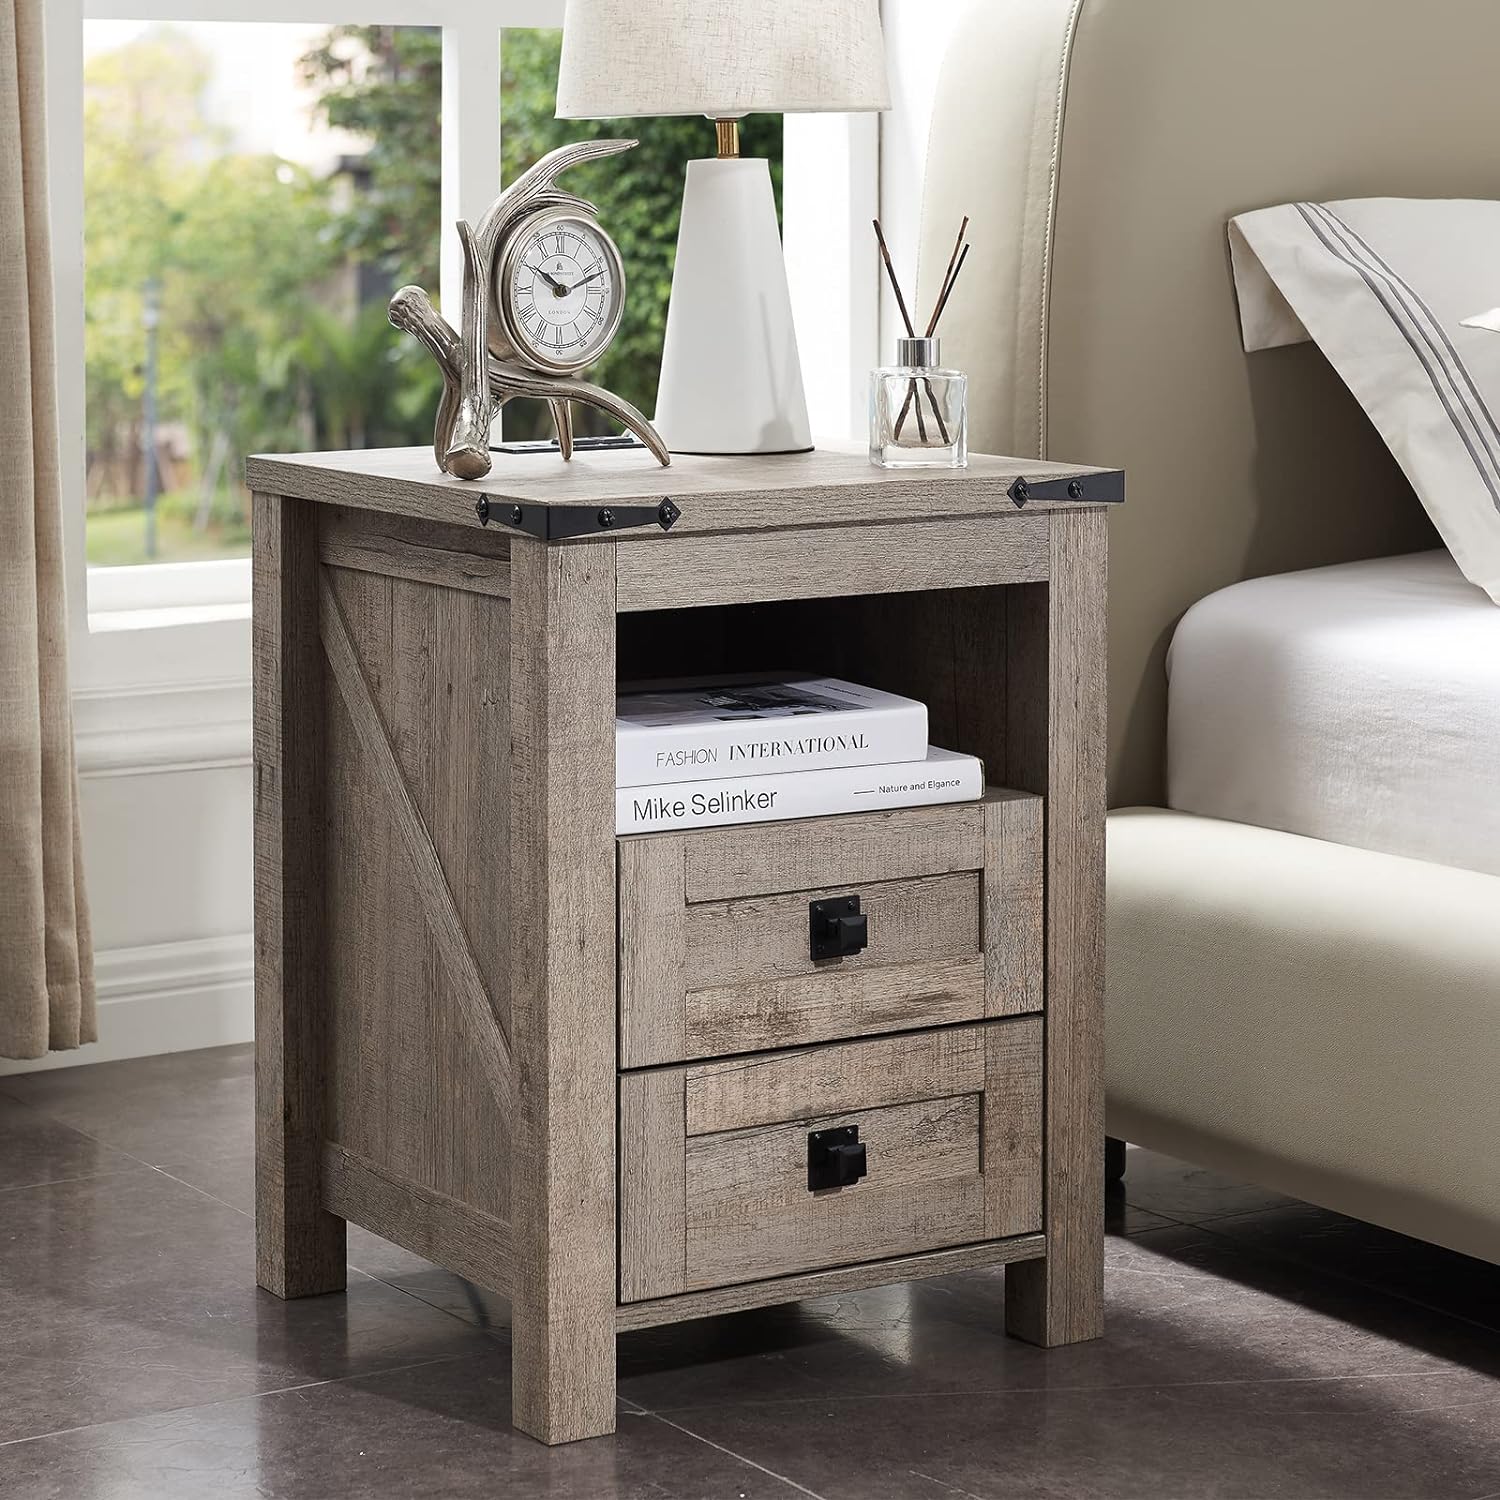 I ordered the night stands and 6 drawer dresser in gray wash. They are very good looking and good quality. The instructions are pictures only and extremely easy to follow. It was time consuming to put together, Id recommend using a drill instead of hand screw to speed up the process. They are heavy so it is best to put them together in the room they will be placed. The drawers might stick if the screws arent flush so be mindful of that when putting together. Overall great product for the price